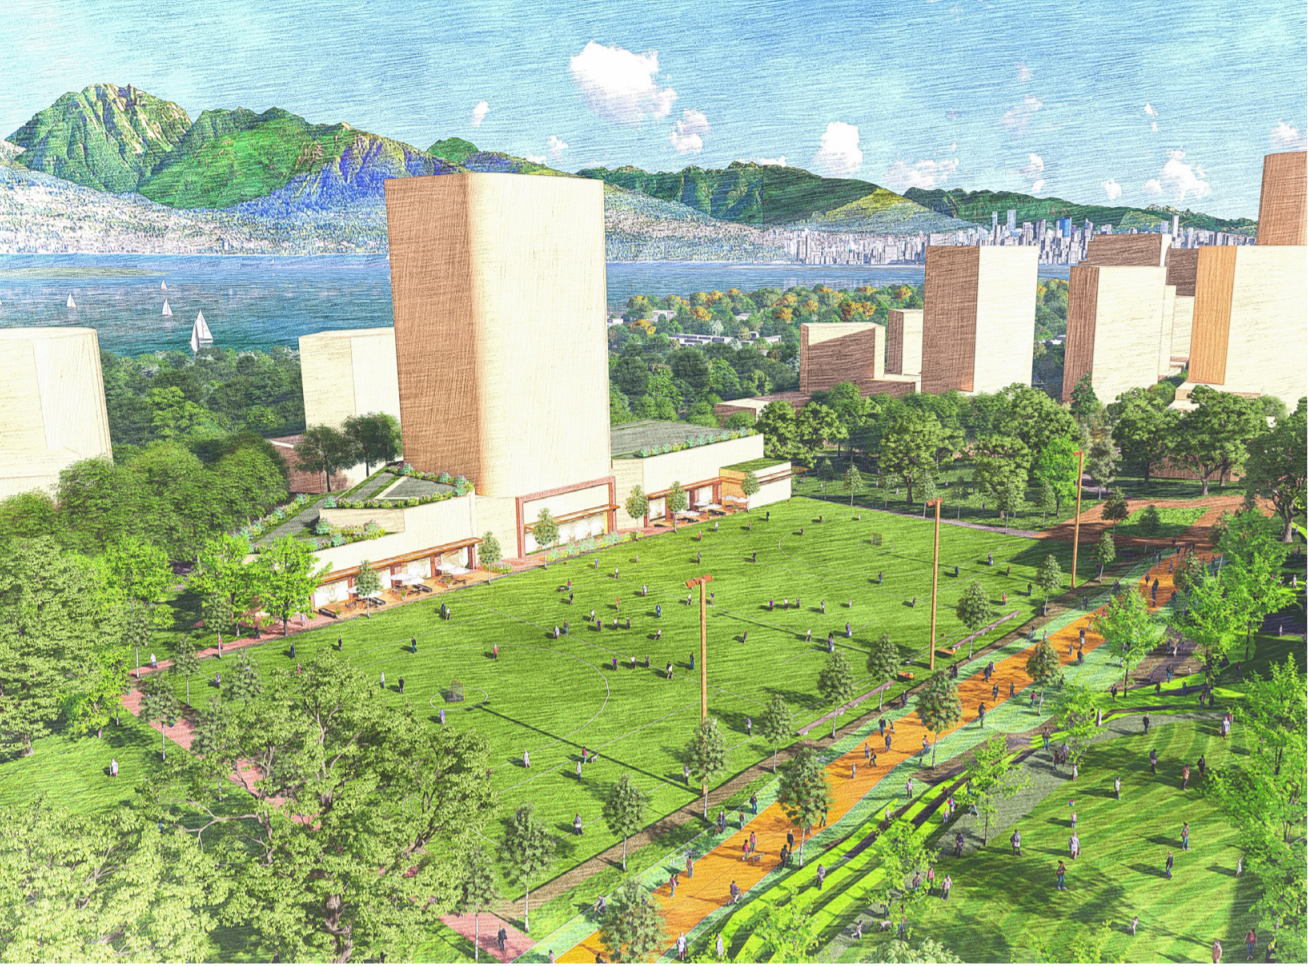 A rendering highlights some of the amenities that would be part of the community “hearts” proposed for Vancouver's Jericho Lands.